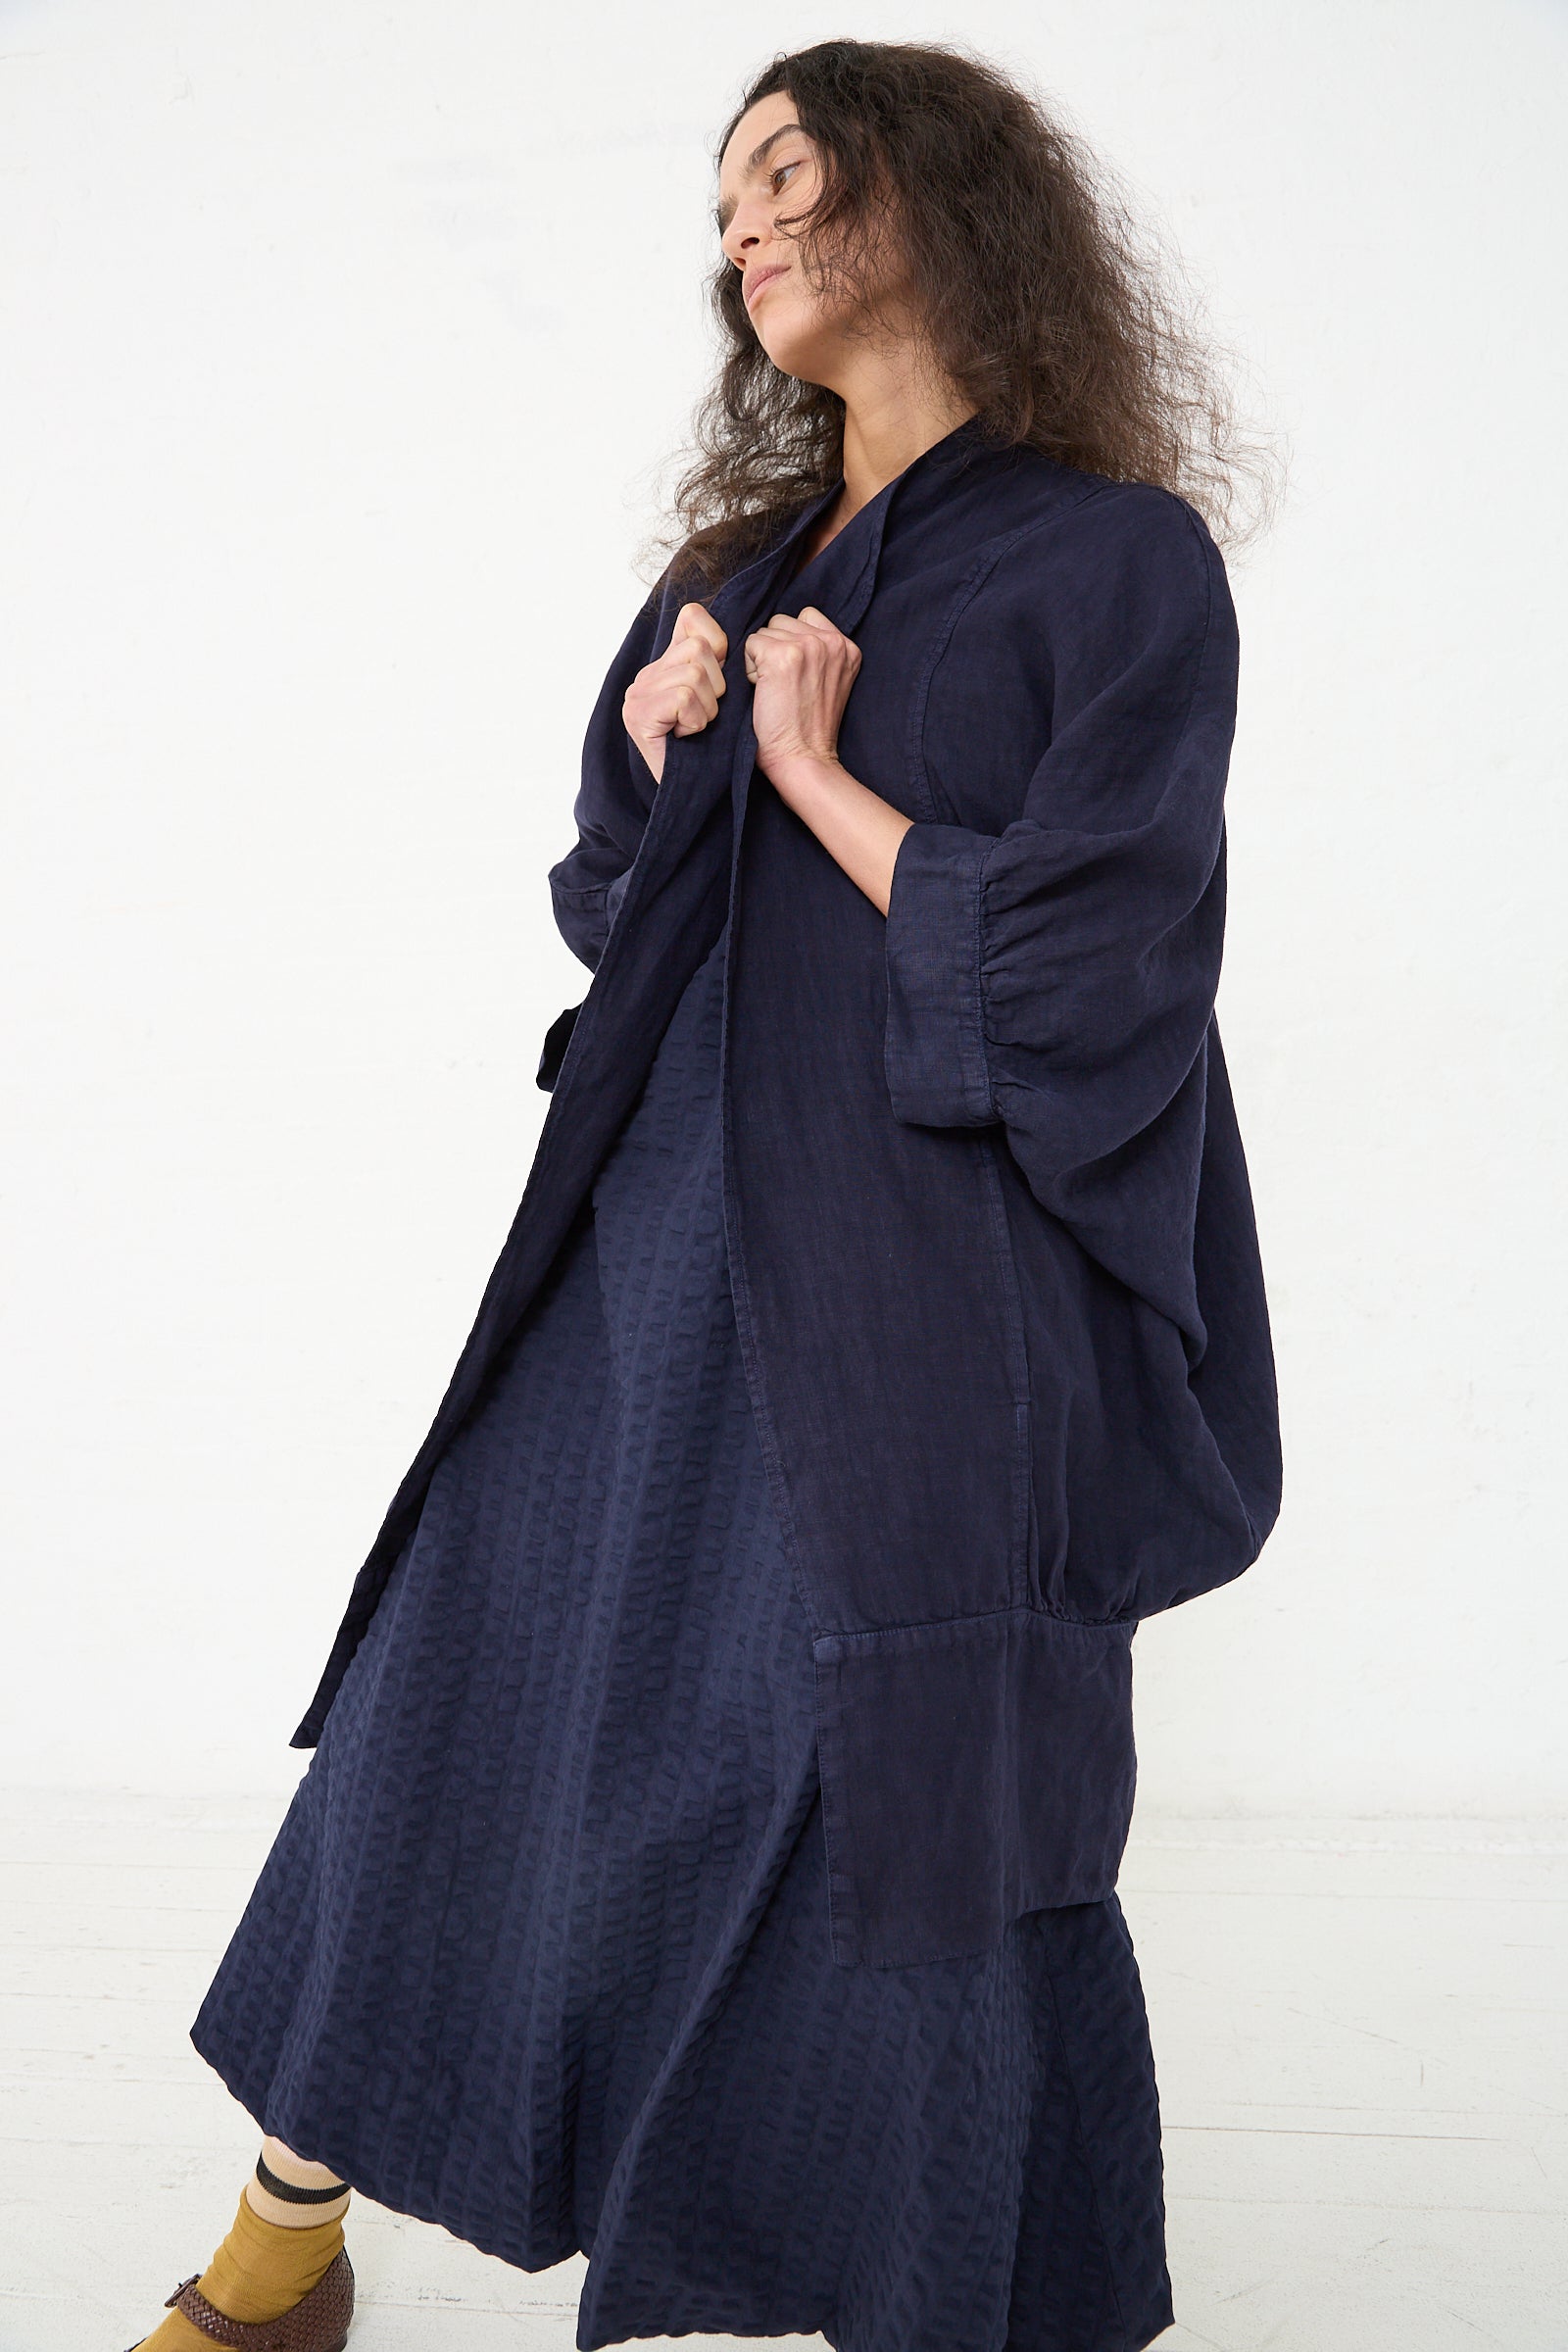 A woman in a textured navy blue ensemble consisting of a Black Crane Linen Spoon Jacket in Indigo and midi dress, paired with brown ankle socks and sandals, stands against a white background with a relaxed pose, her gaze directed slightly.